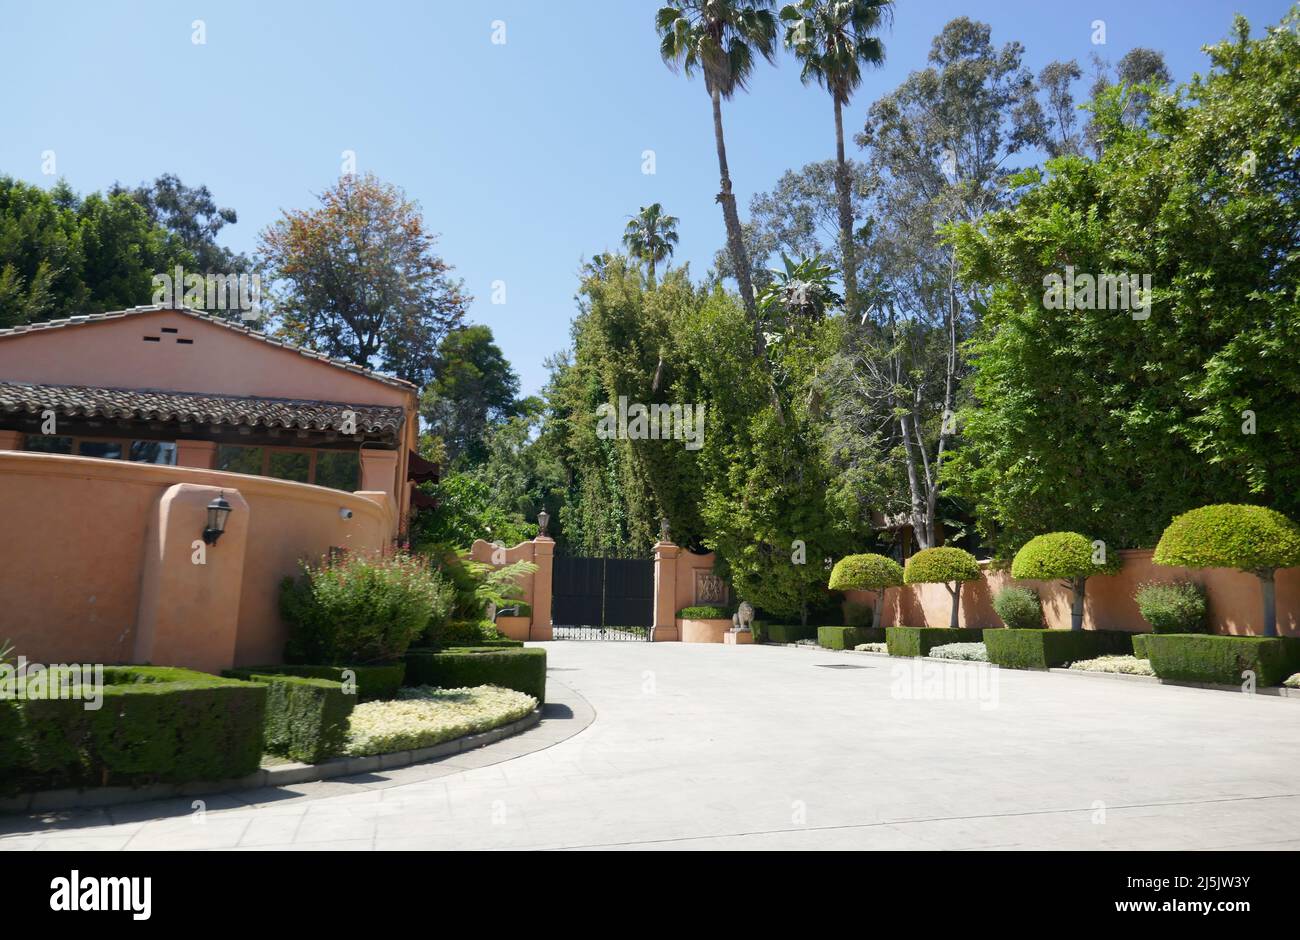 Beverly Hills, California, USA 17th April 2022 A general view of atmosphere of Actress Eleanor Boardman, Actor Horace Brown, Actress Marion Davies and William Randolph Hearst's Former Home/house at 1009 N. Beverly Drive on April 17, 2022 in Beverly Hills, California, USA. This Estate/Mansion was used in Filming The Godfather, The Bodyguard, The Jerk, Fletch, Into the Night Movies and Colbys, Mod Squad Charlie's Angels Television Series. Beyonce Filmed Black Is King Video here. John F. Kennedy and Jackie Onassis honeymooned here. Photo by Barry King/Alamy Stock Photo Stock Photo